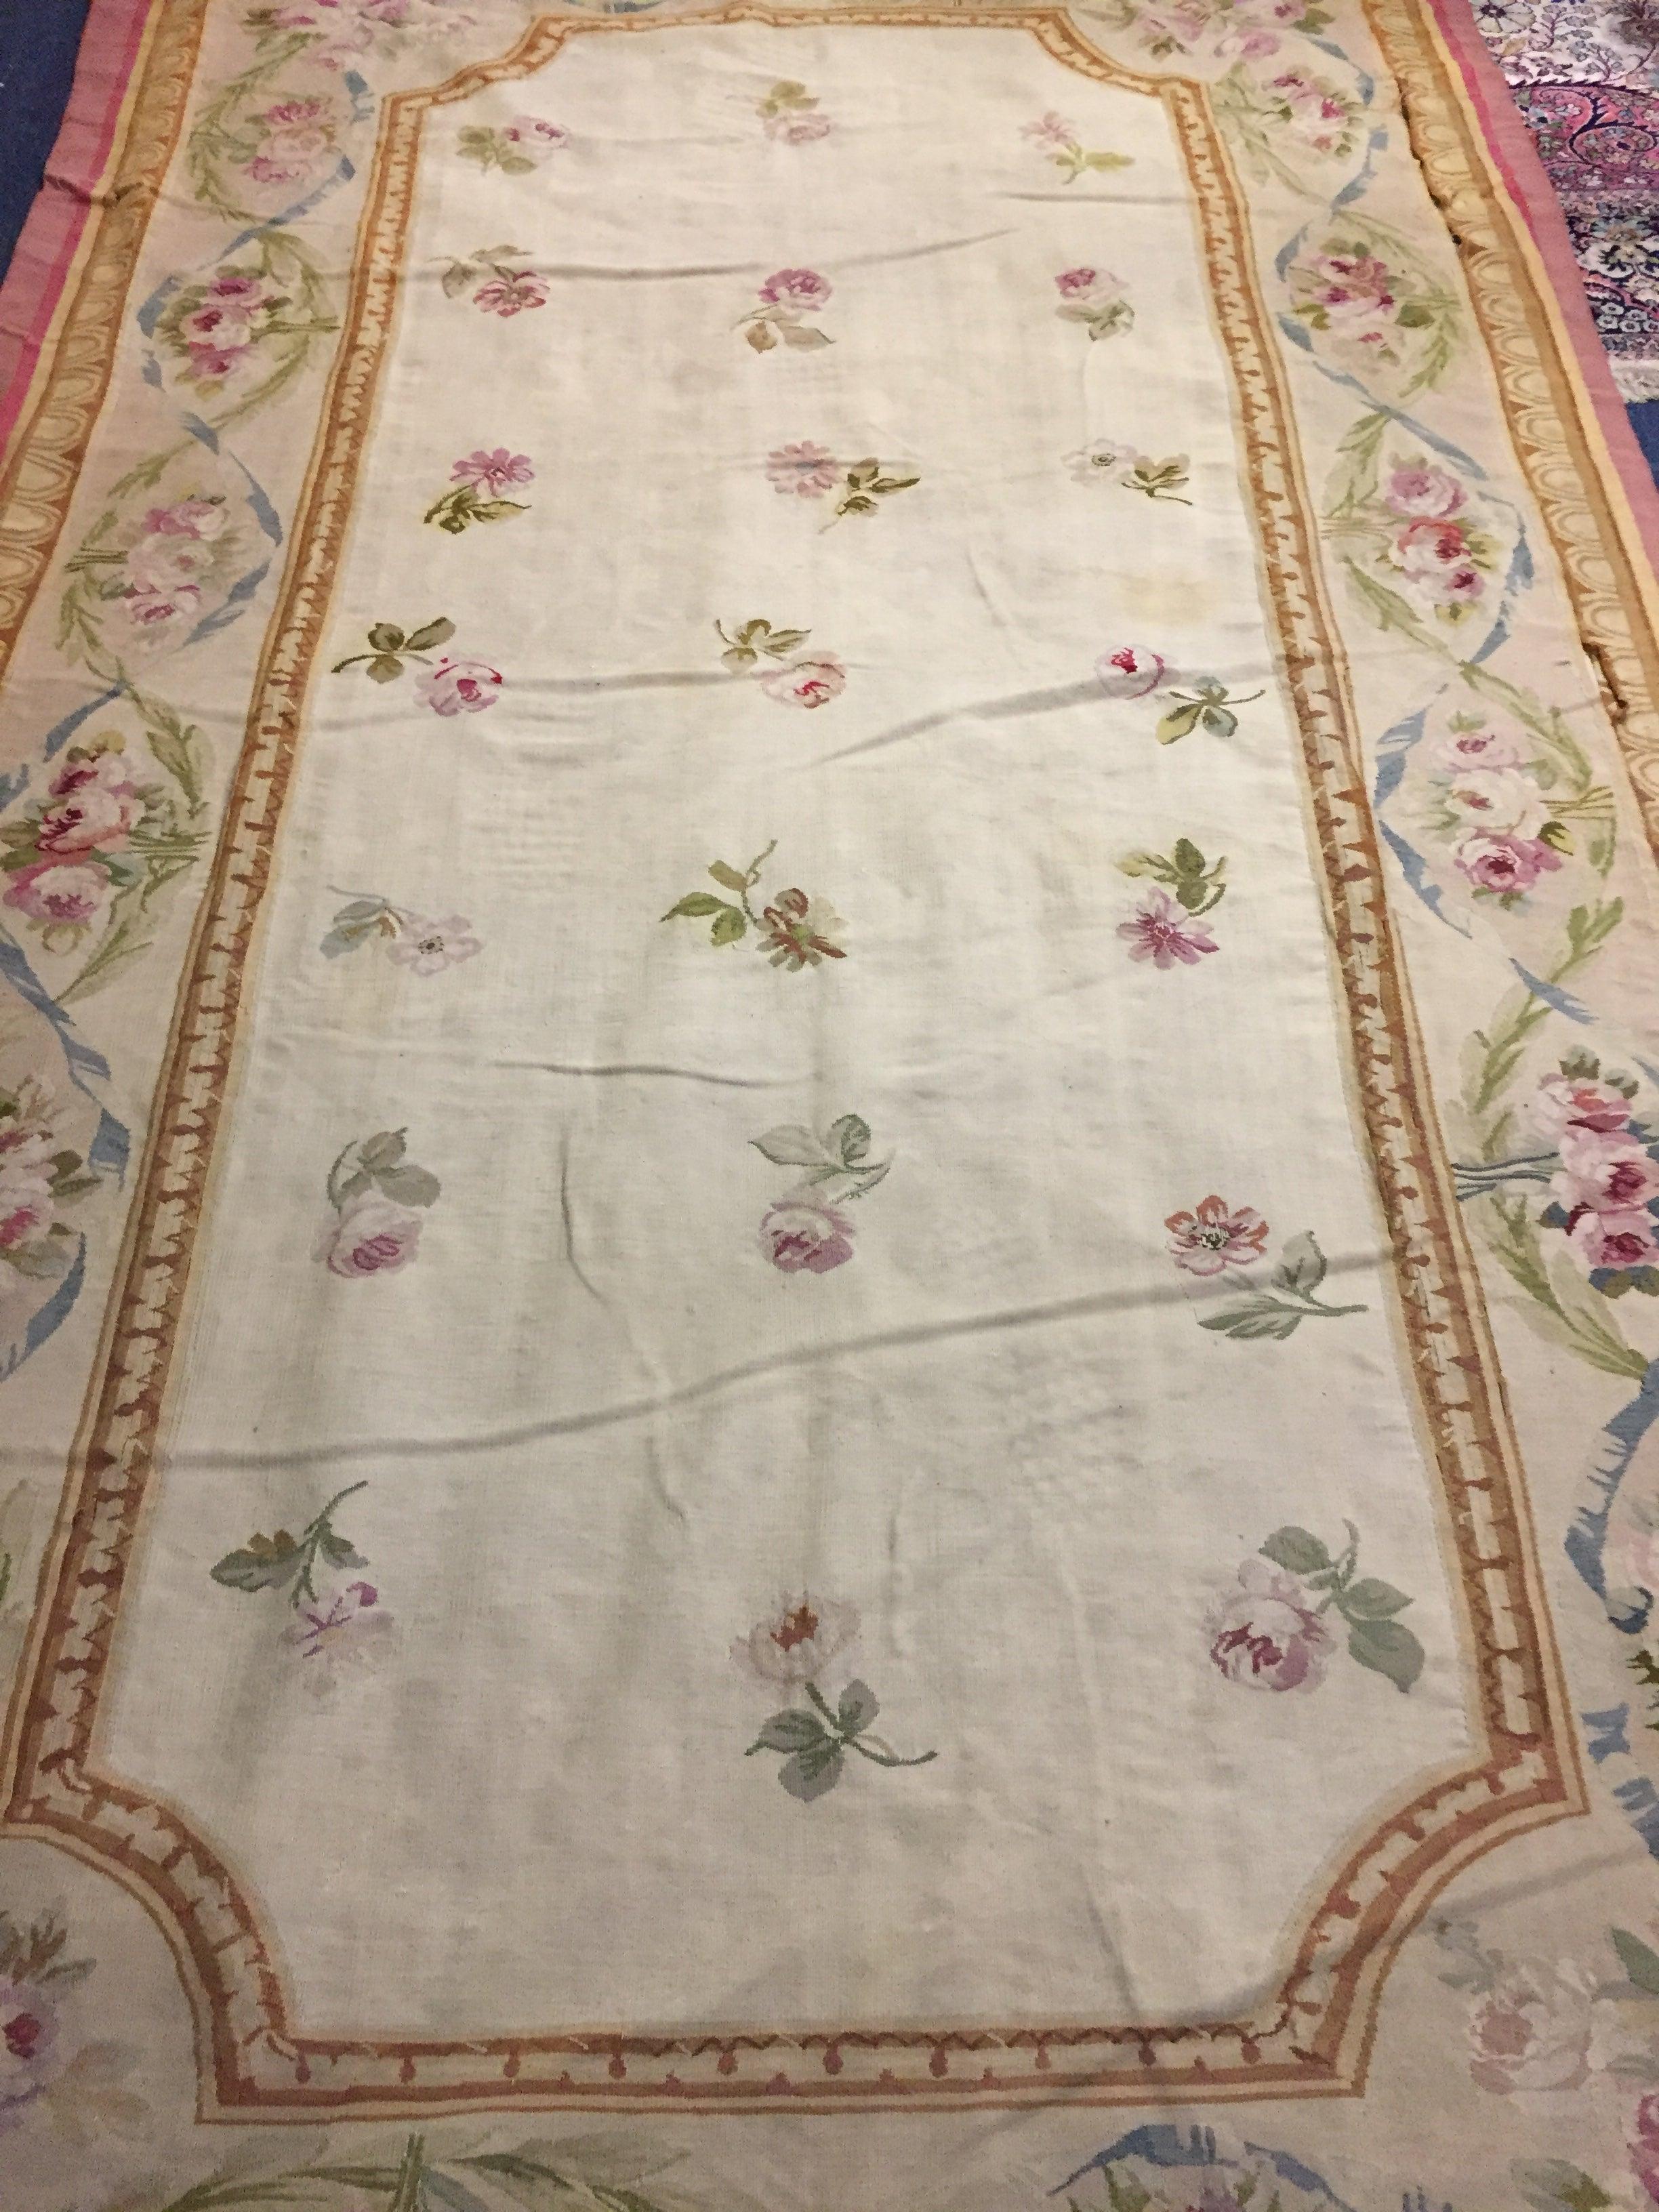 Antique French Aubusson Palace Rug, circa 1930 wool hand woven 4